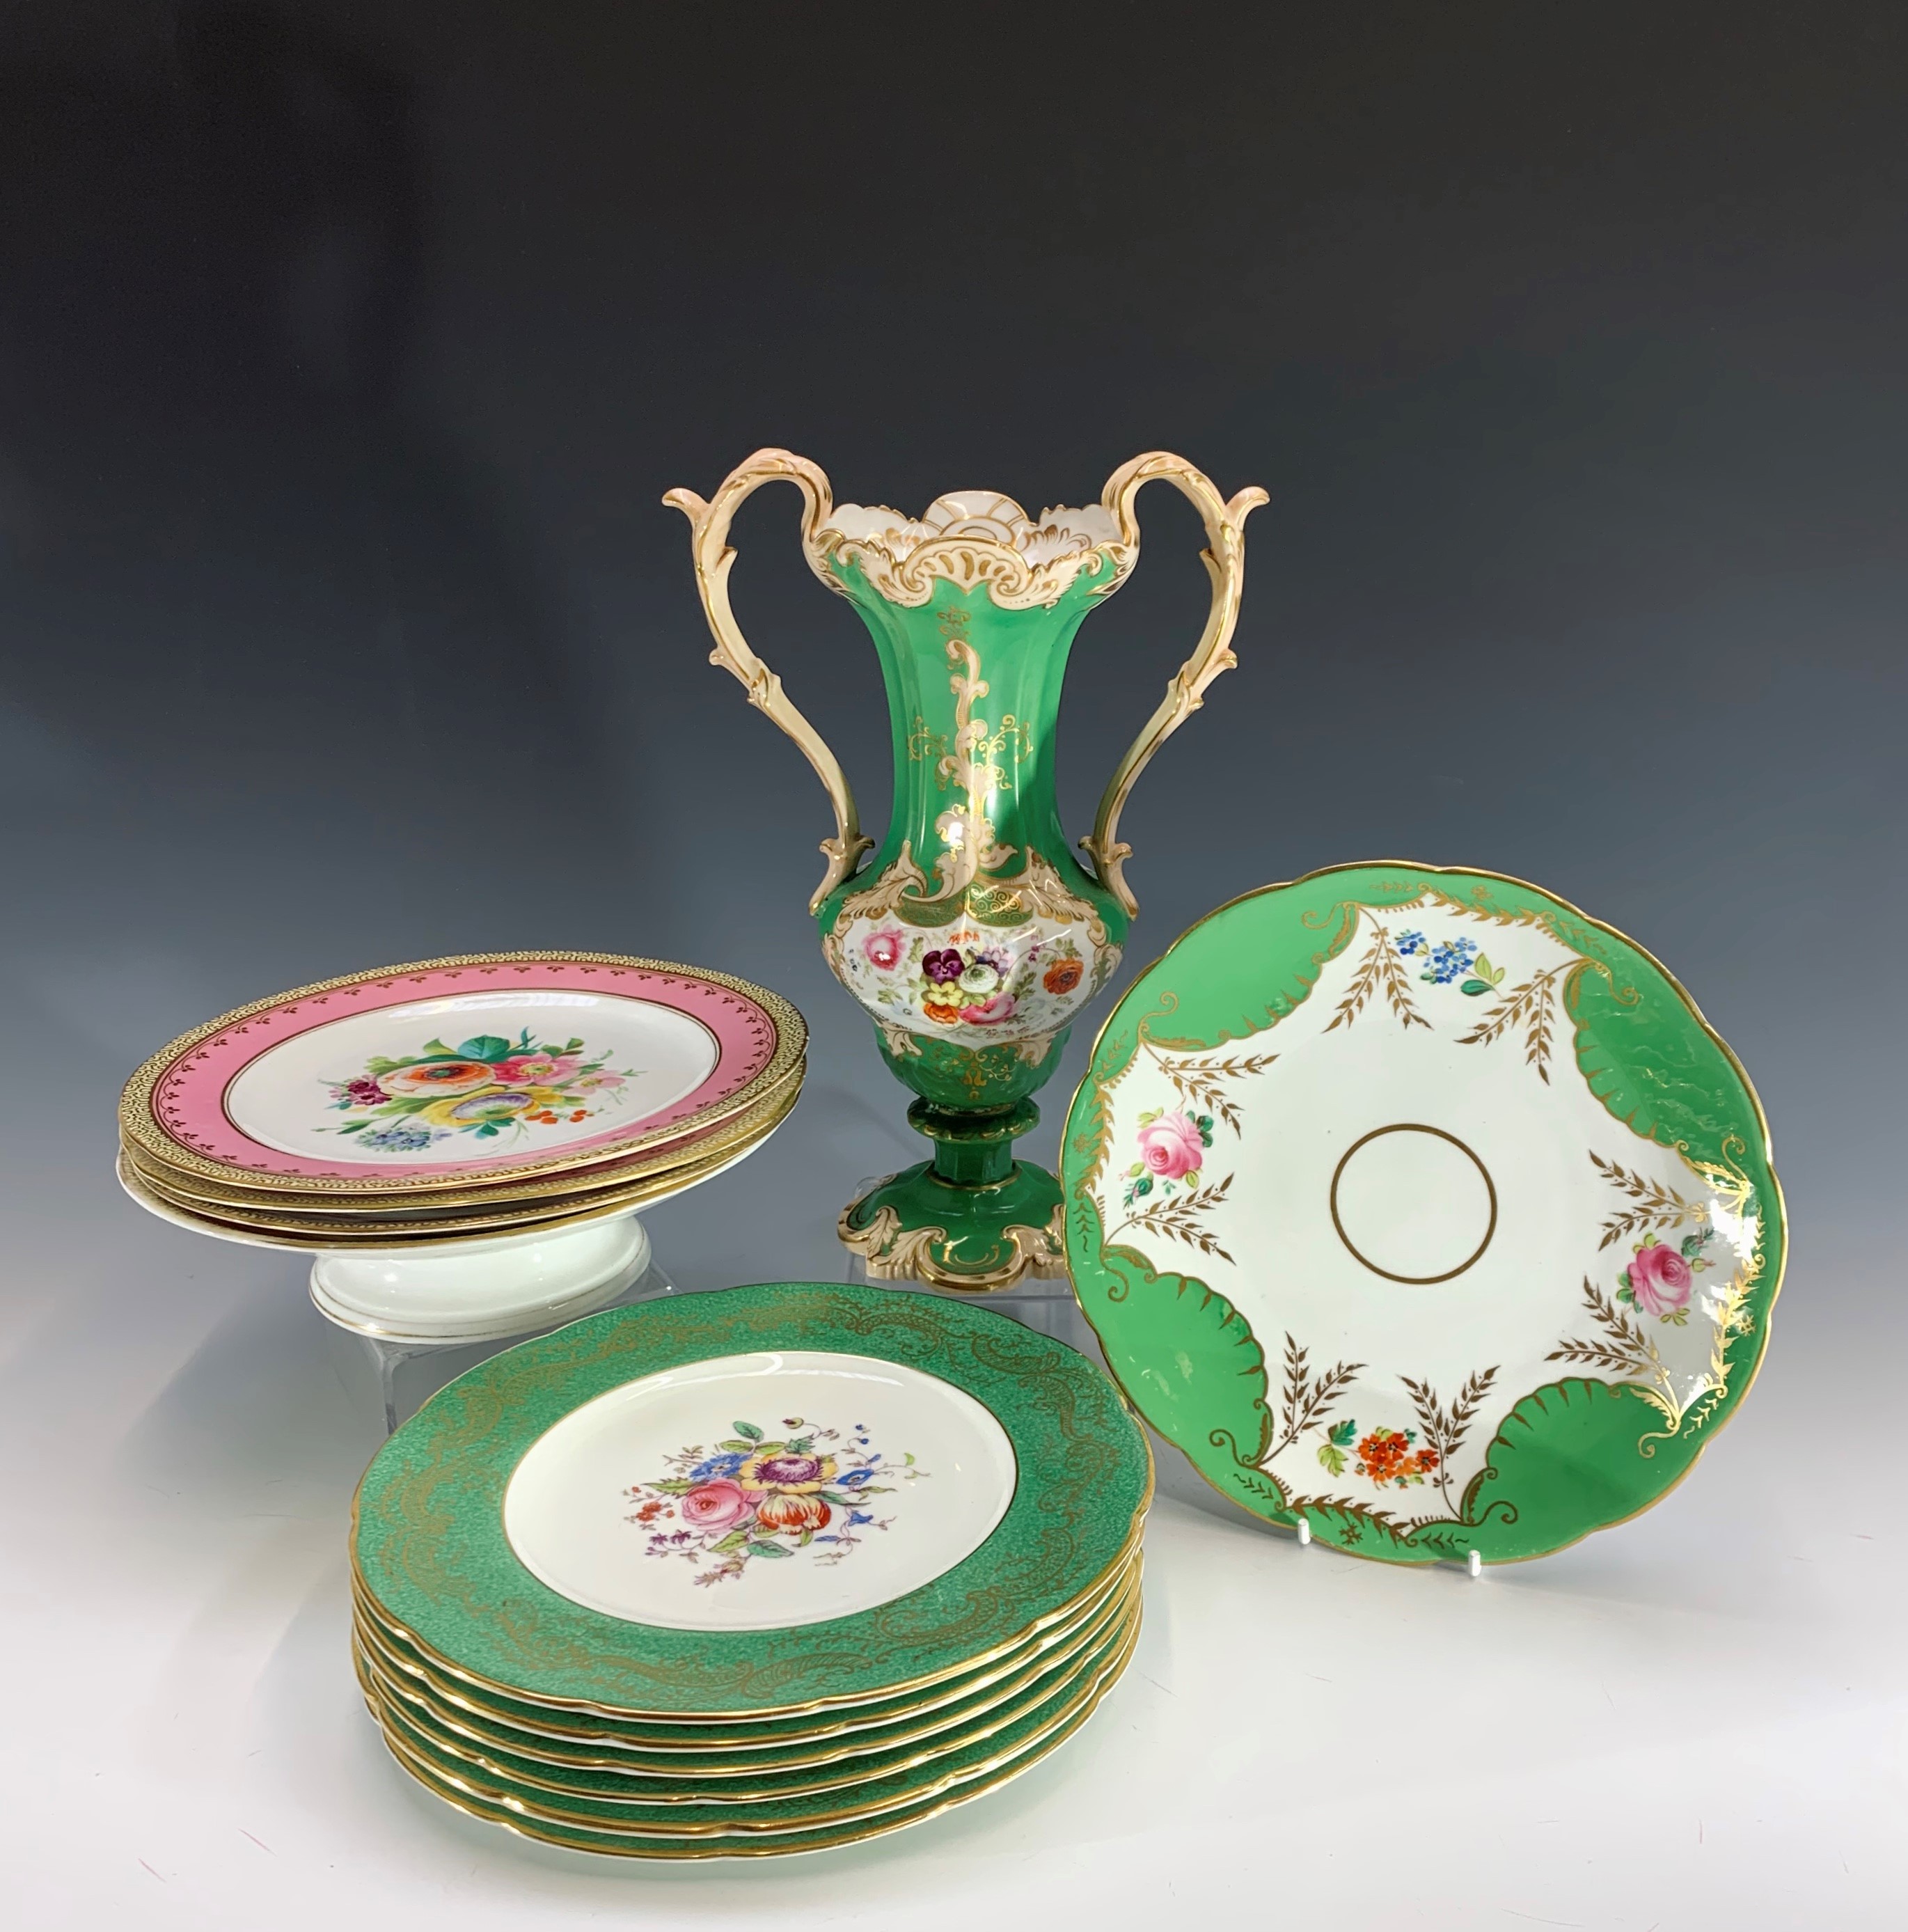 Six early 20th century Coalport plates retailed by T. Hayward & Co. of Manchester, each painted with